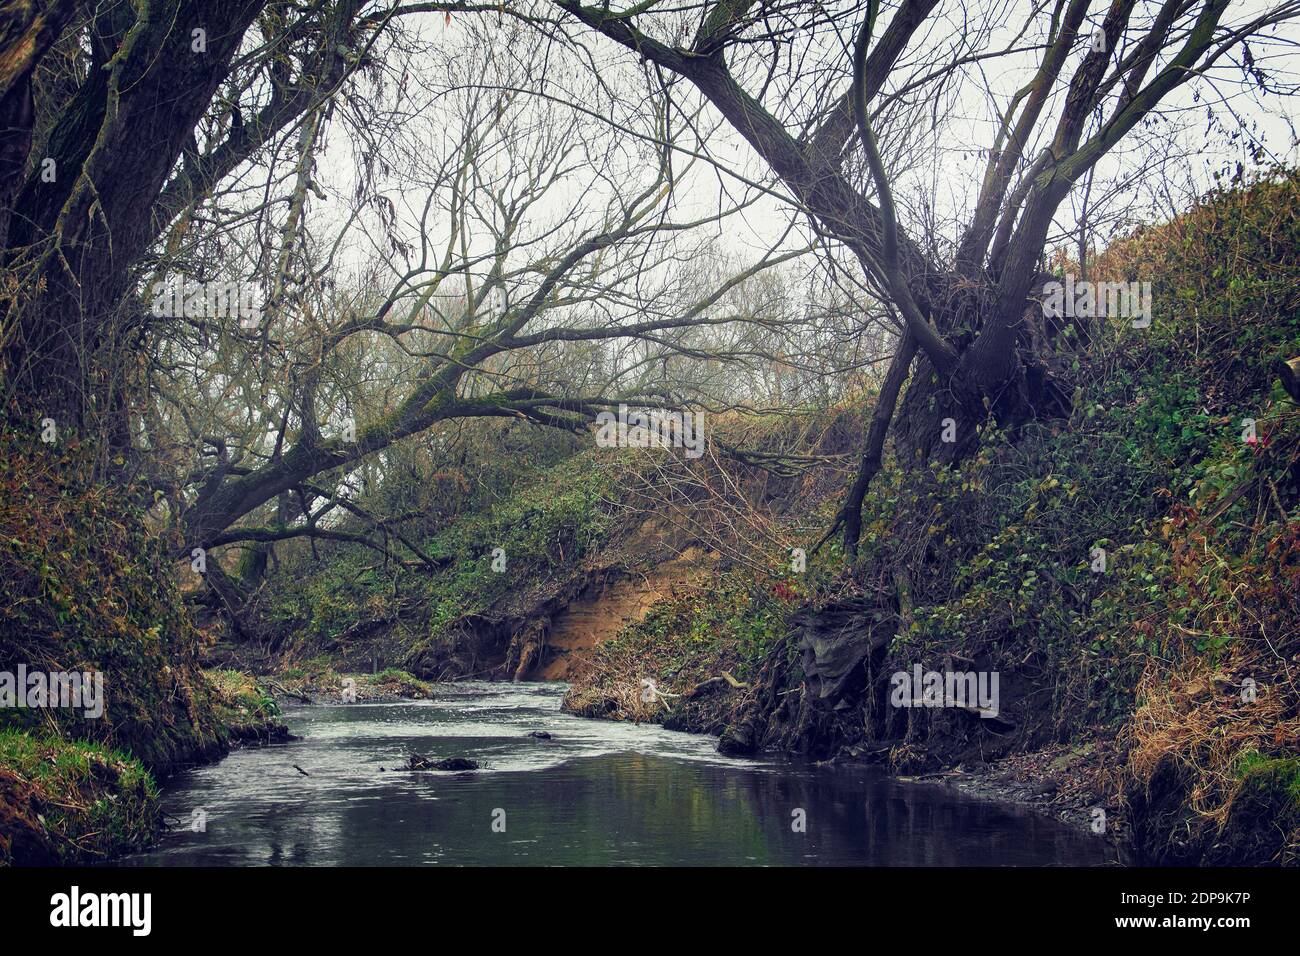 Overhanging old weeping willow trees with shallow river beneath in picturesque countryside Stock Photo